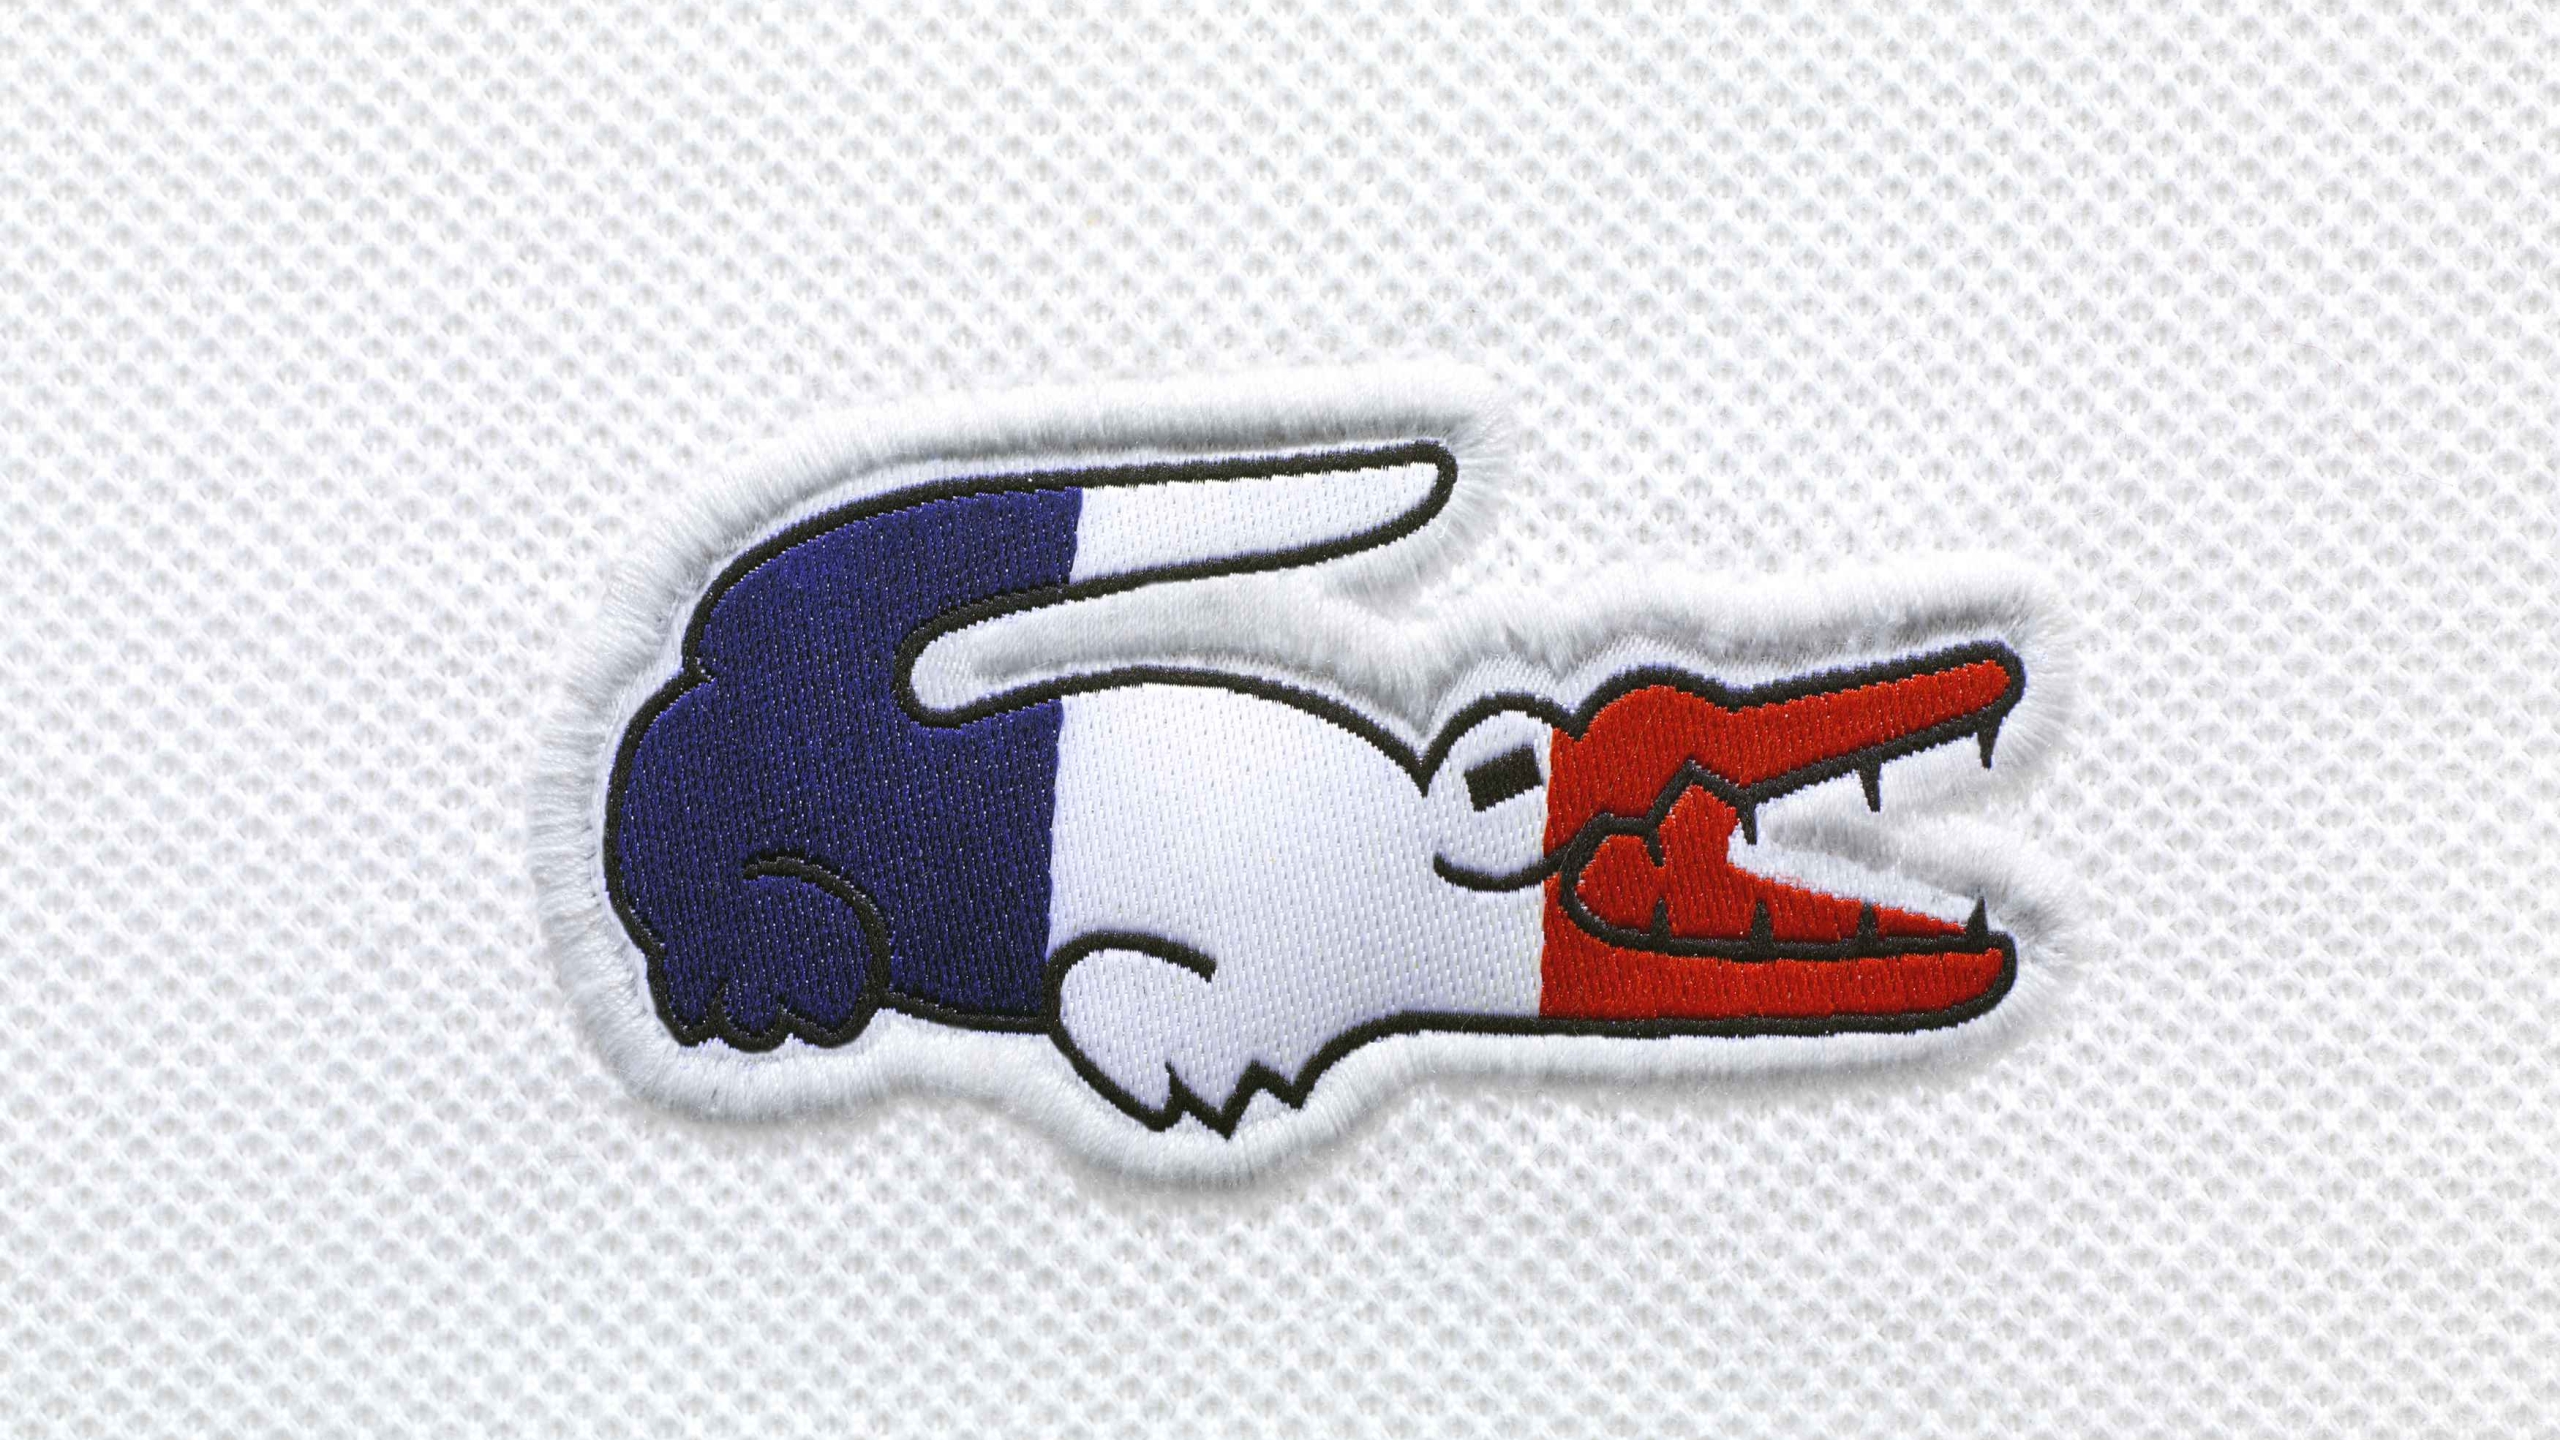 2560x1440 Resolution lacoste, france, brand 1440P Resolution Wallpaper ...